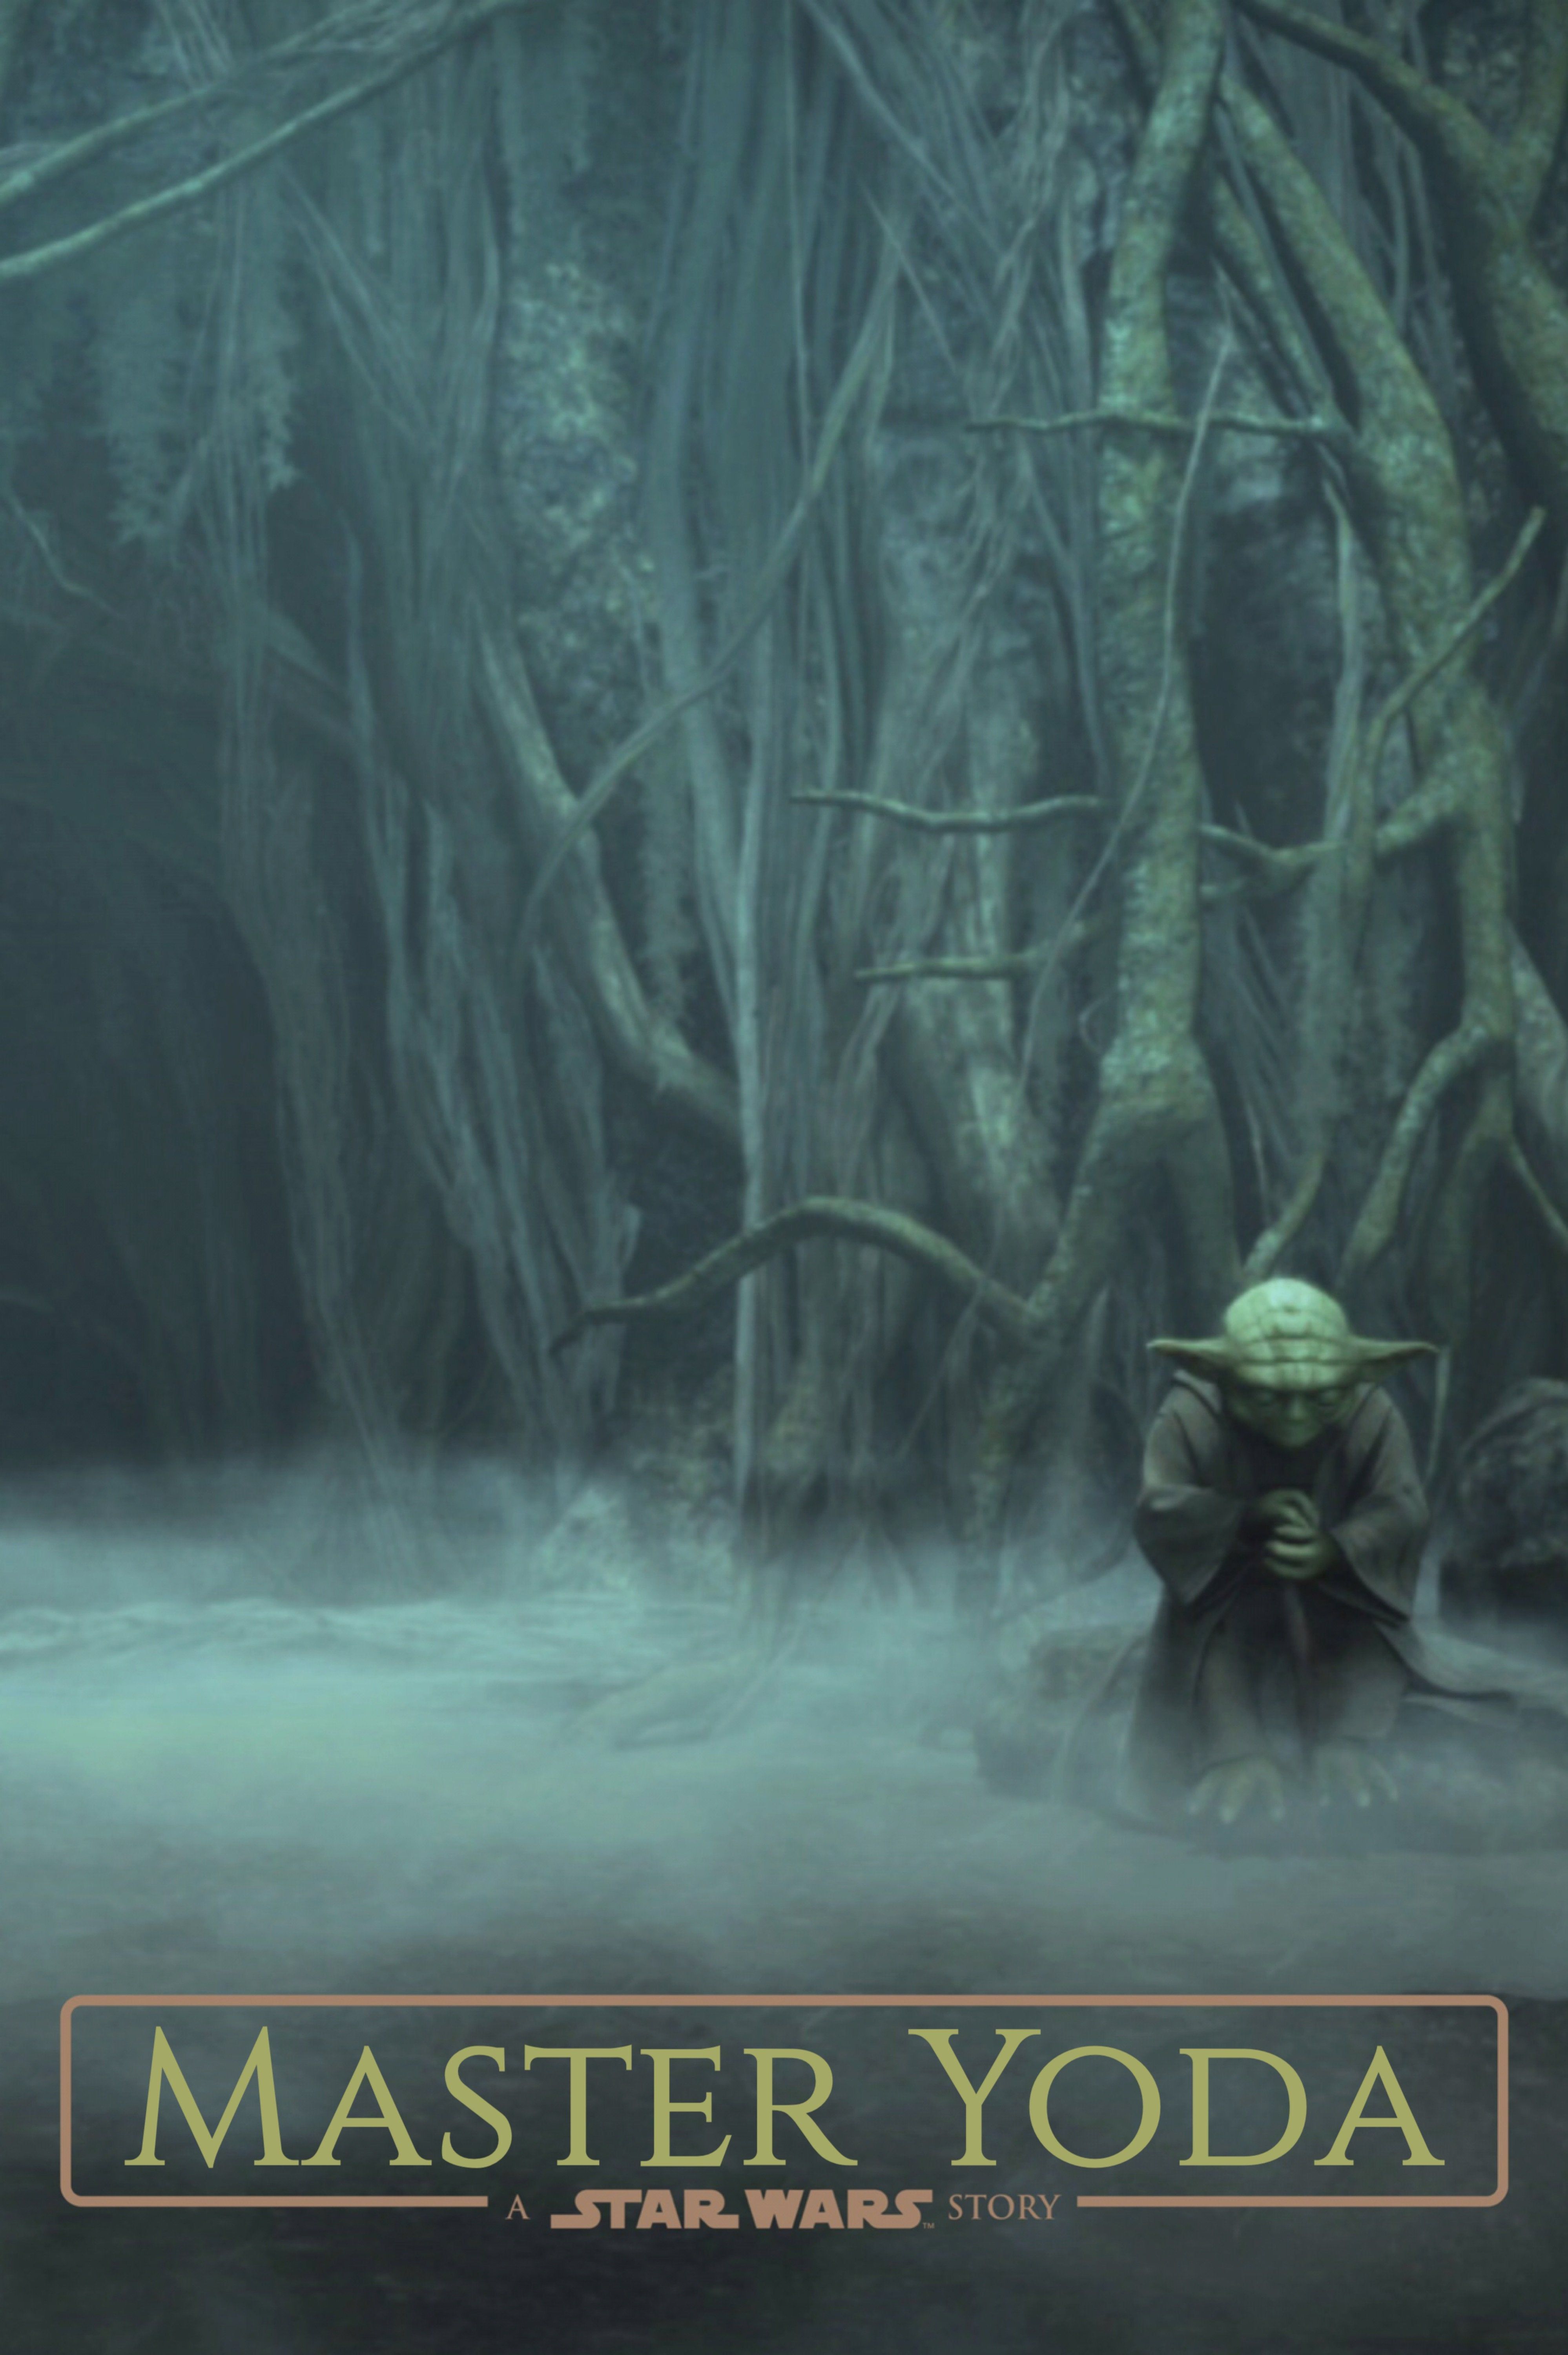 Found this EPIC Yoda Wallpaper online, and thought it would look